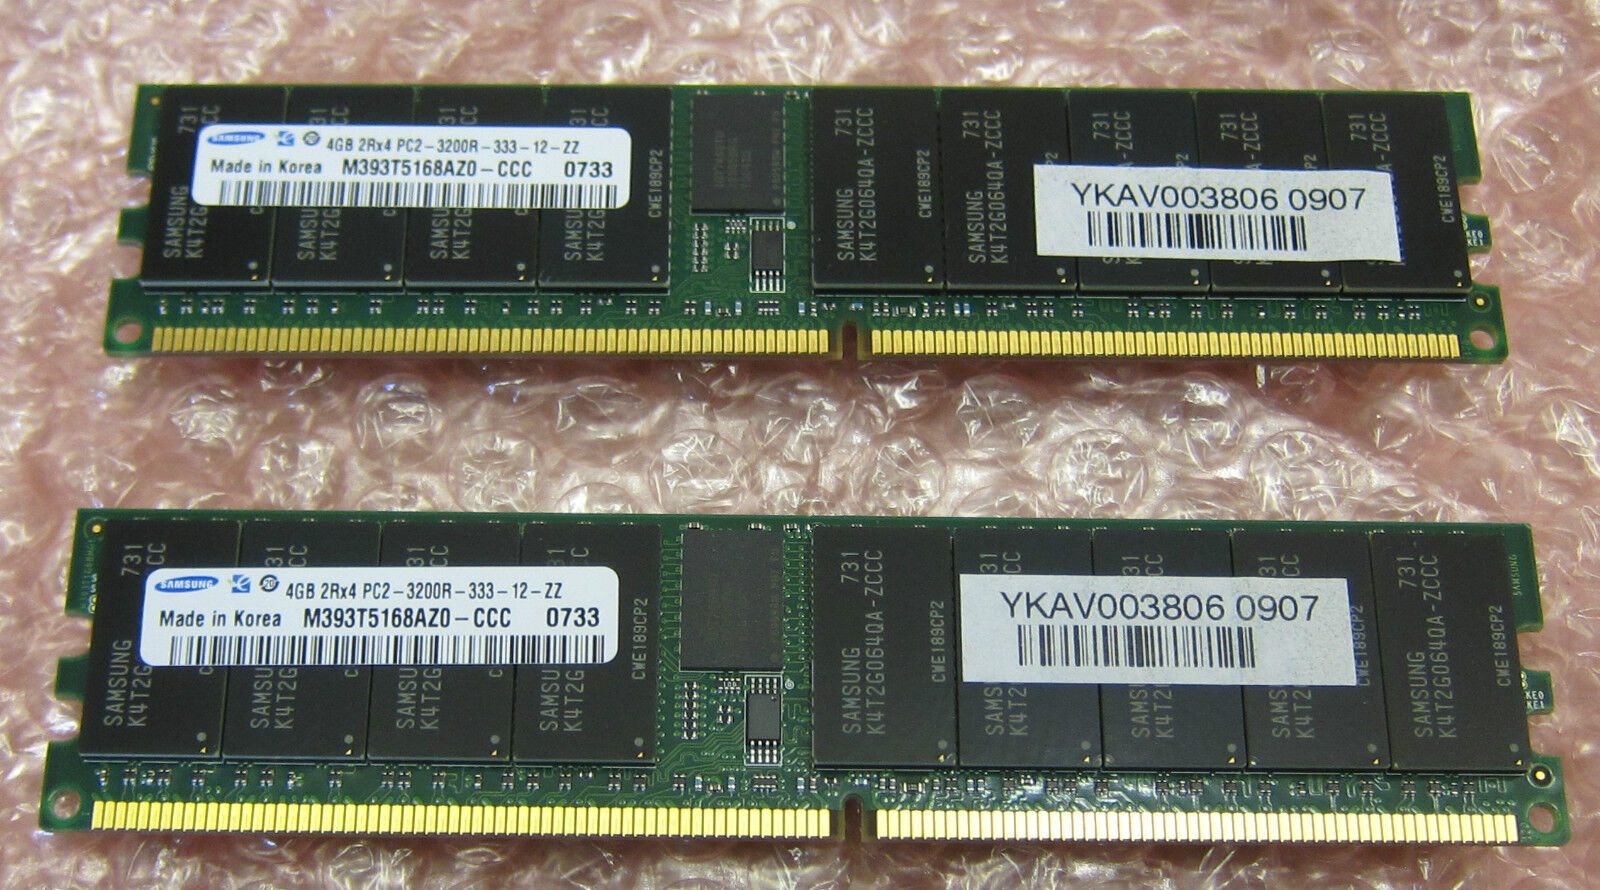 8Gb (2 x 4Gb) PC2-3200R for Dell PowerEdge 2850 6850 6800 6850 servers and other